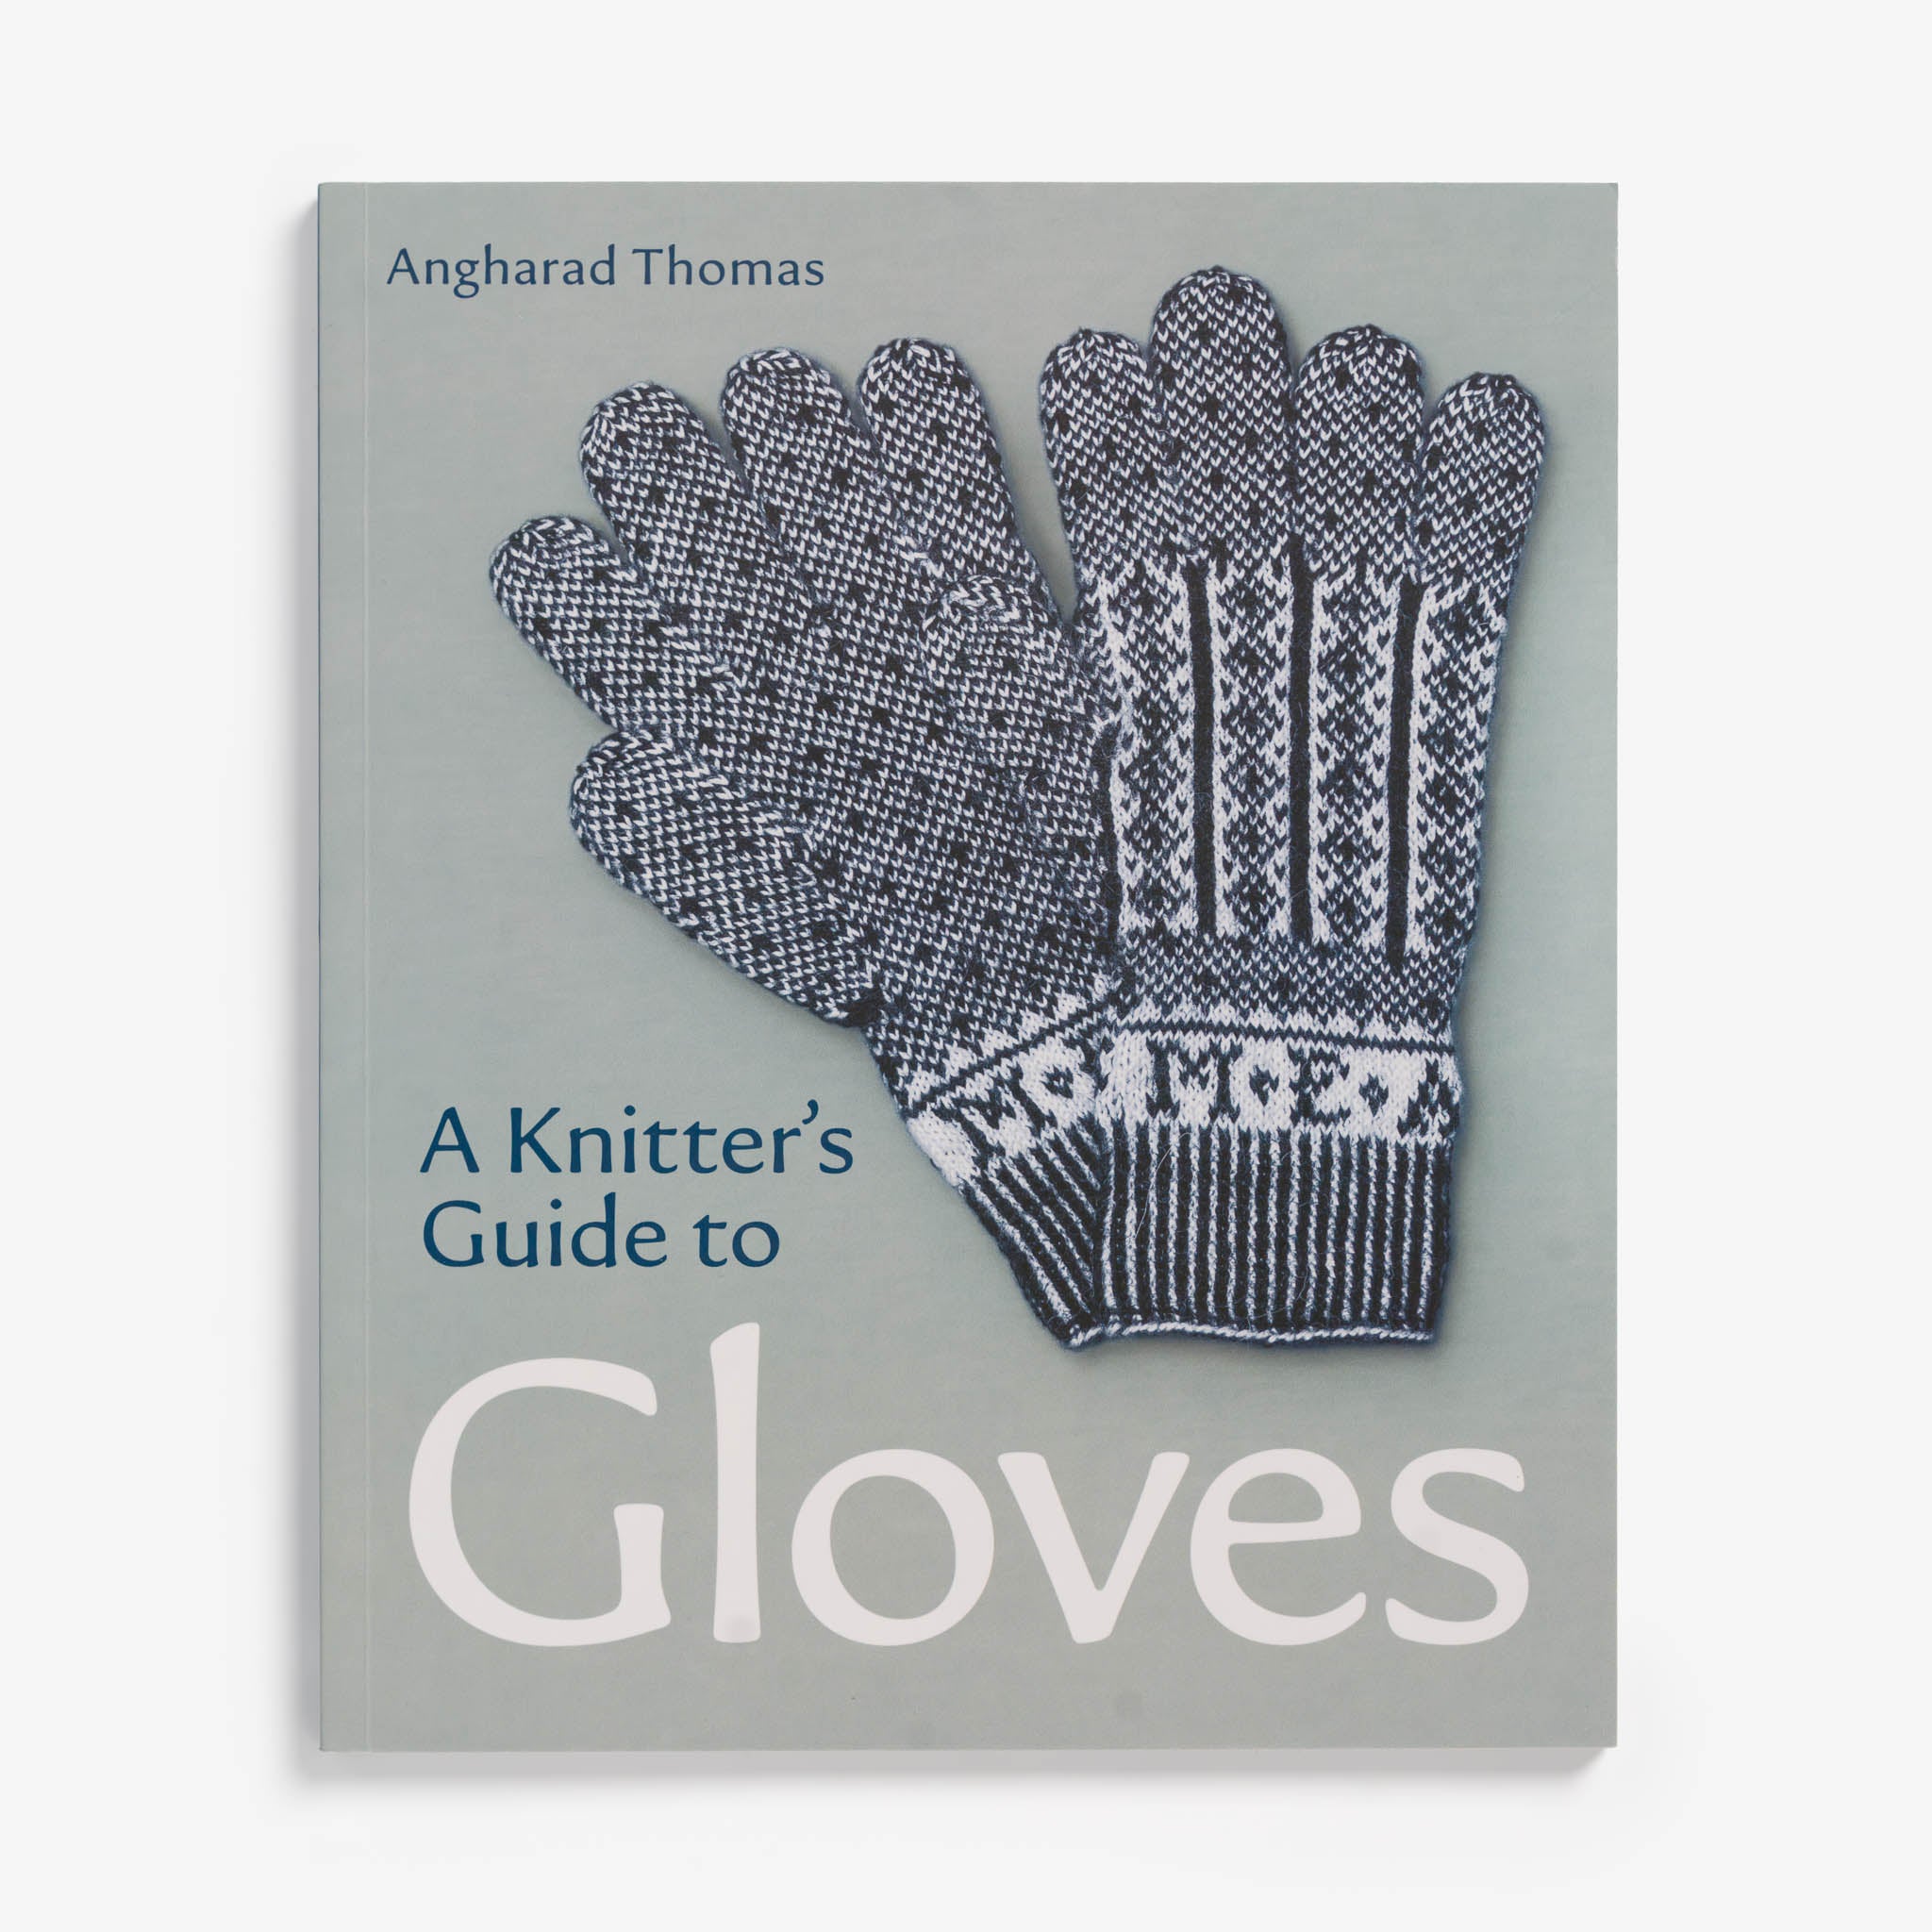 A Knitters Guide to Gloves by Anghadrad Thomas